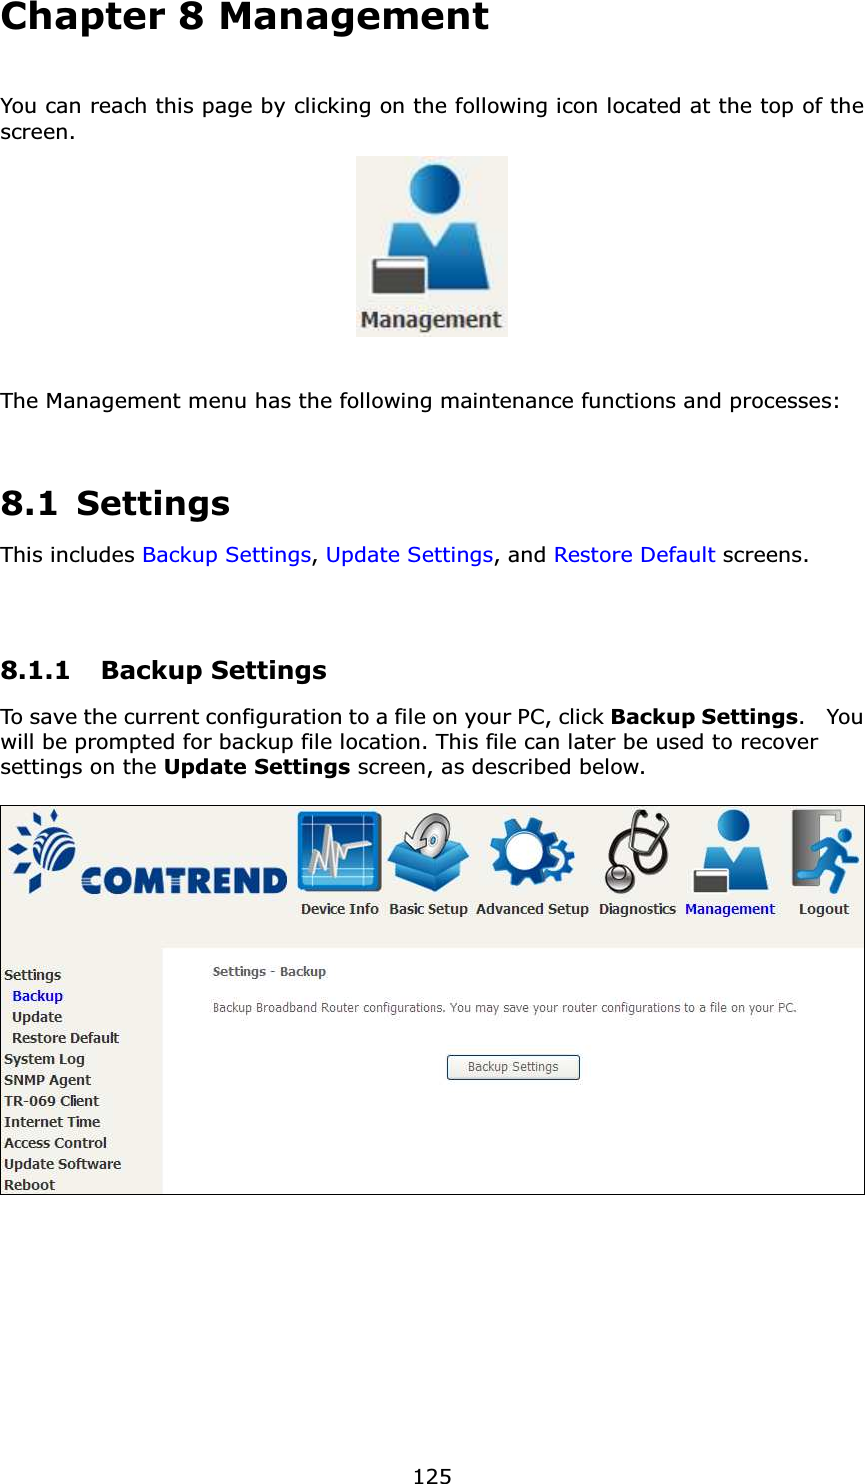  125Chapter 8 Management You can reach this page by clicking on the following icon located at the top of the screen.    The Management menu has the following maintenance functions and processes:   8.1 Settings This includes Backup Settings, Update Settings, and Restore Default screens.   8.1.1 Backup Settings  To save the current configuration to a file on your PC, click Backup Settings.  You will be prompted for backup file location. This file can later be used to recover settings on the Update Settings screen, as described below.    